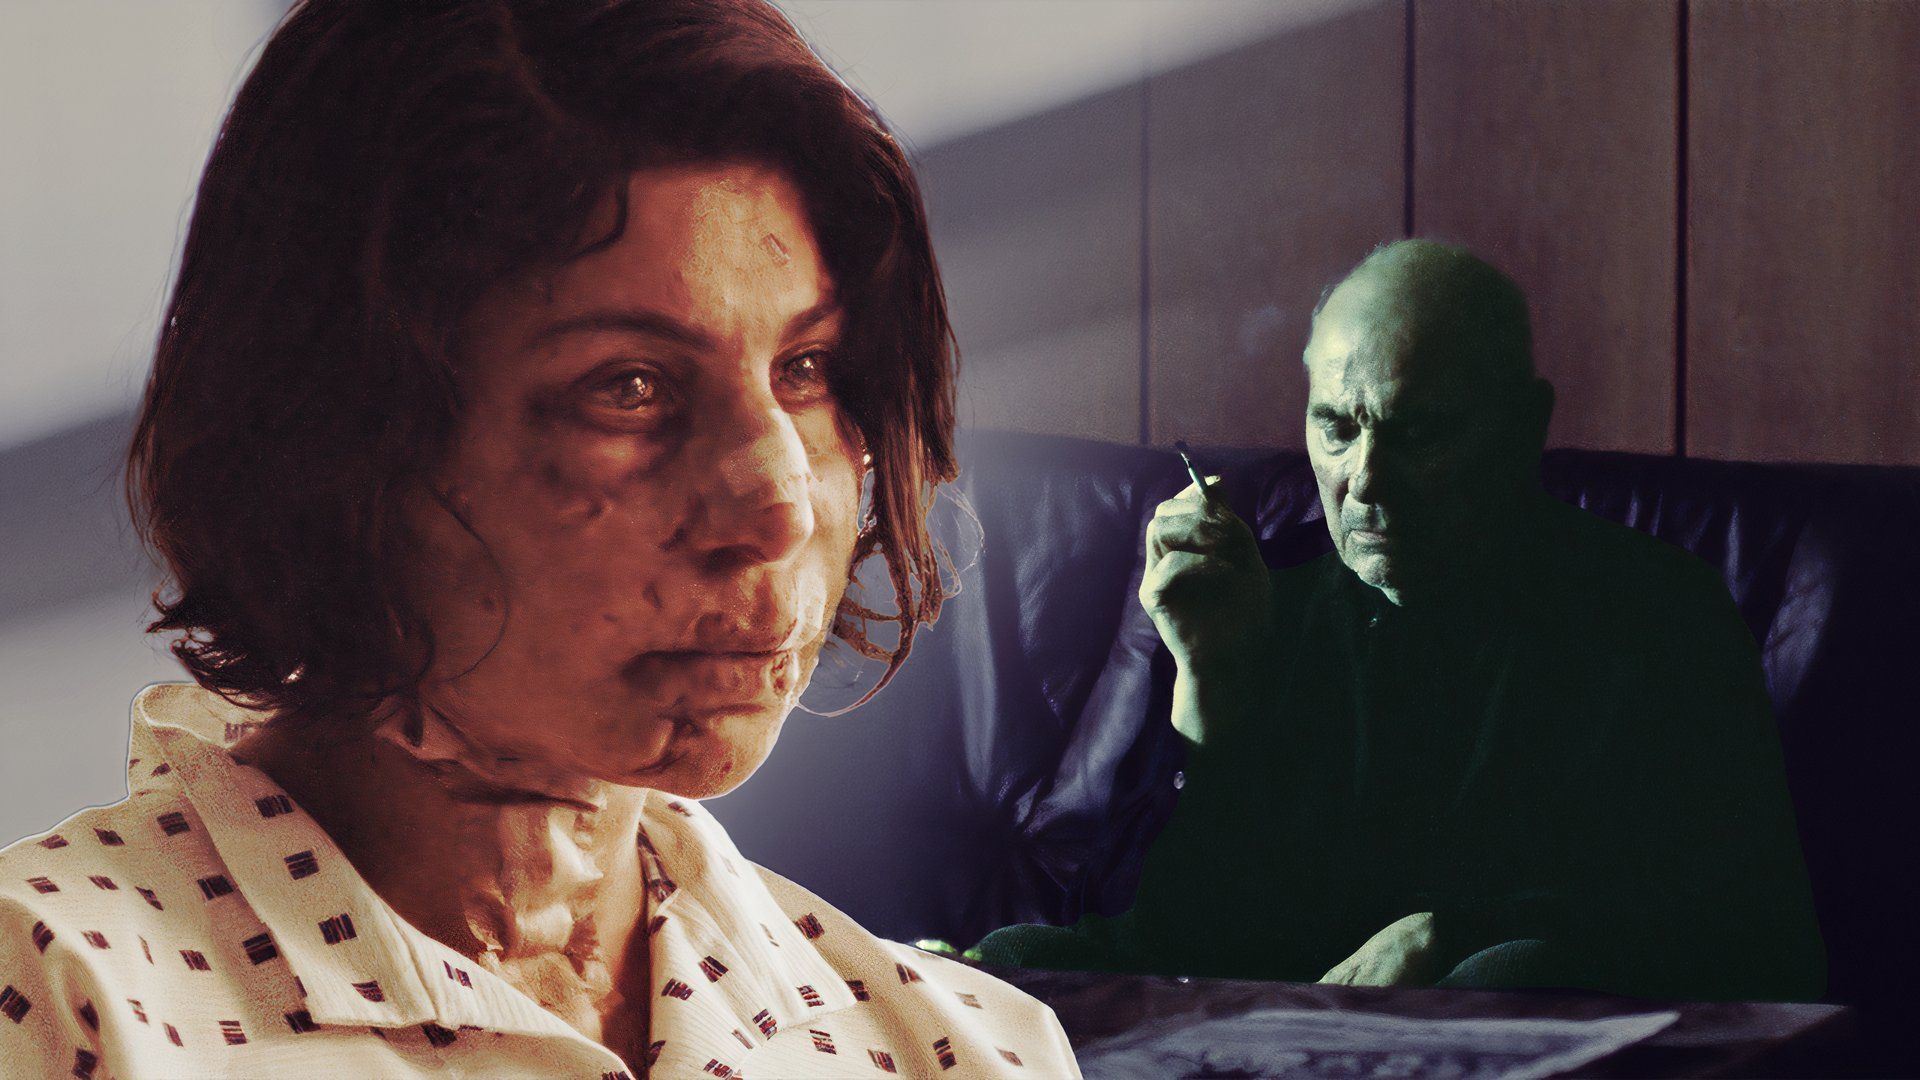 An edited image of an older man smoking and a woman with cuts on her face as a zombie in Handling the Undead